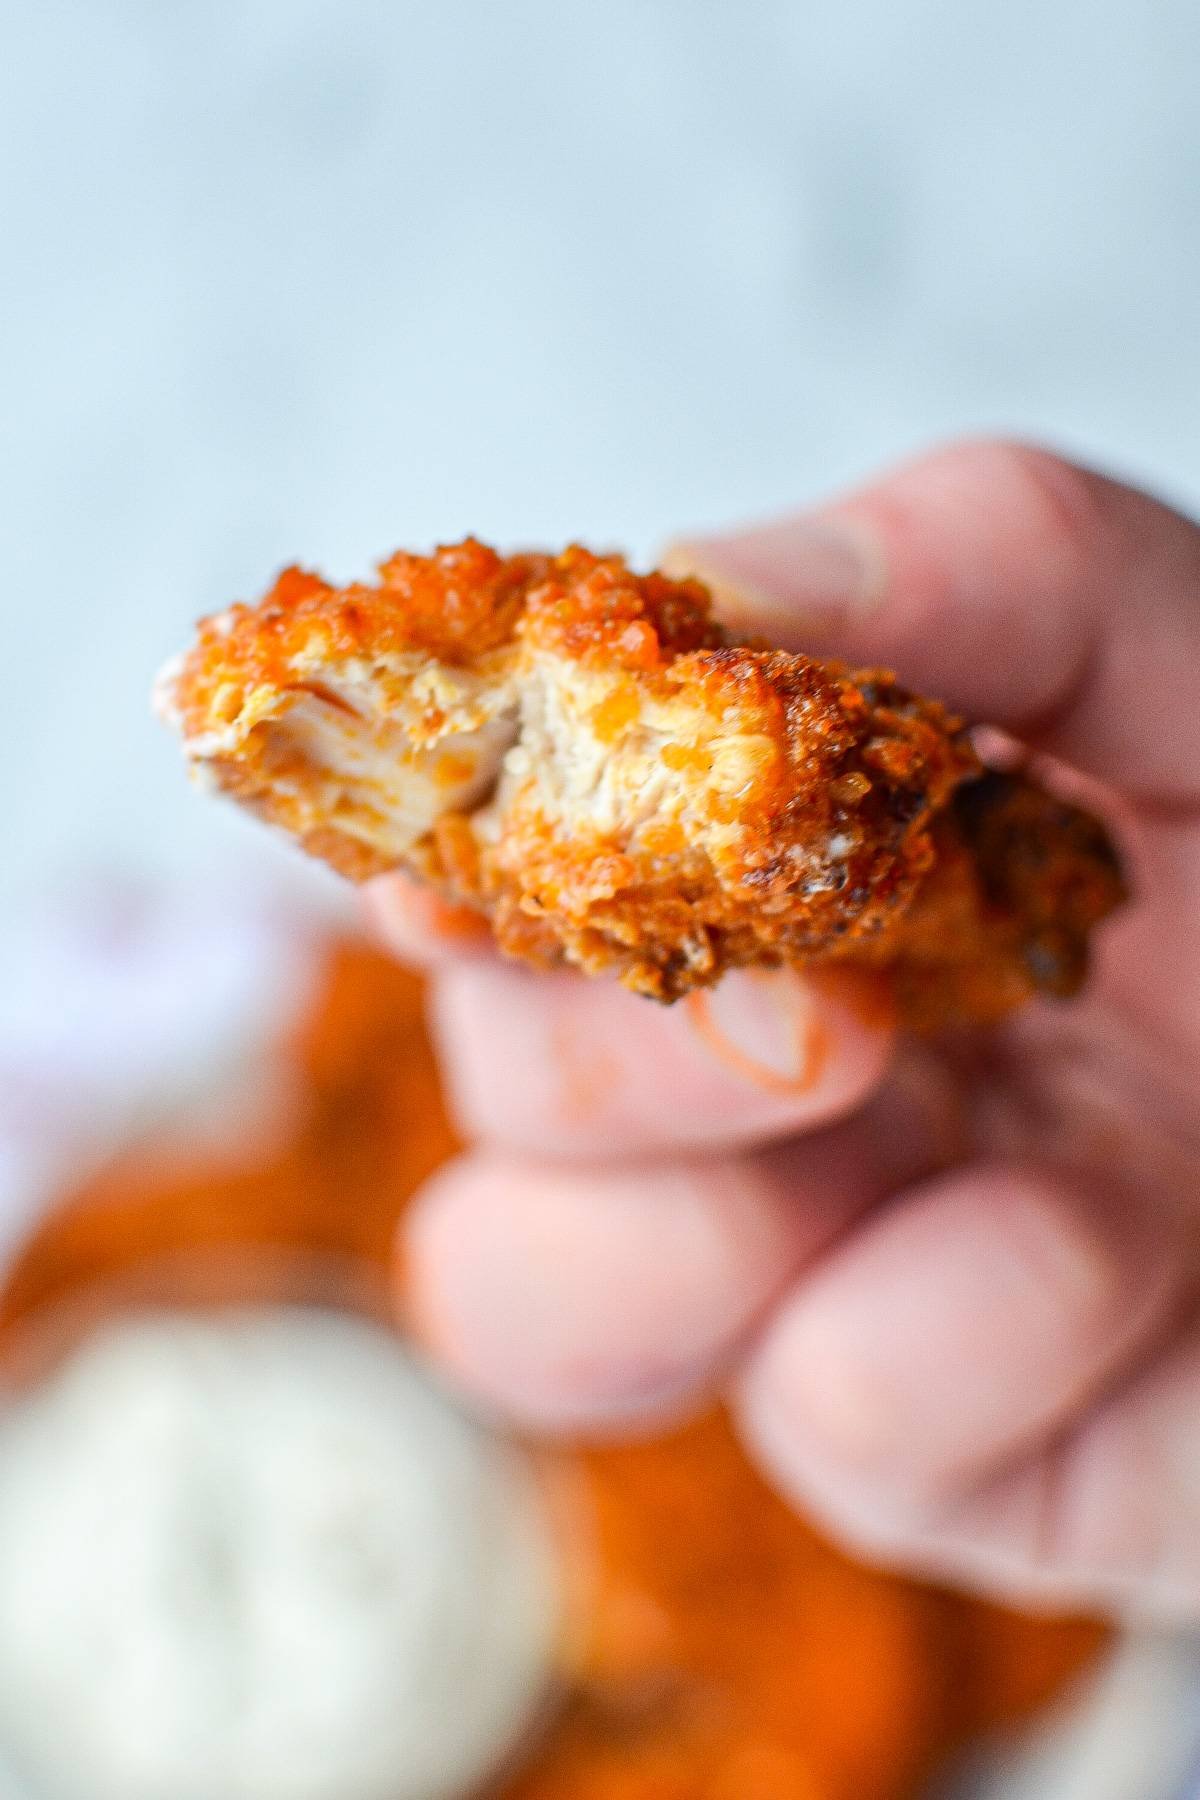 A piece of buffalo chicken tenders with a bite taken out of it.